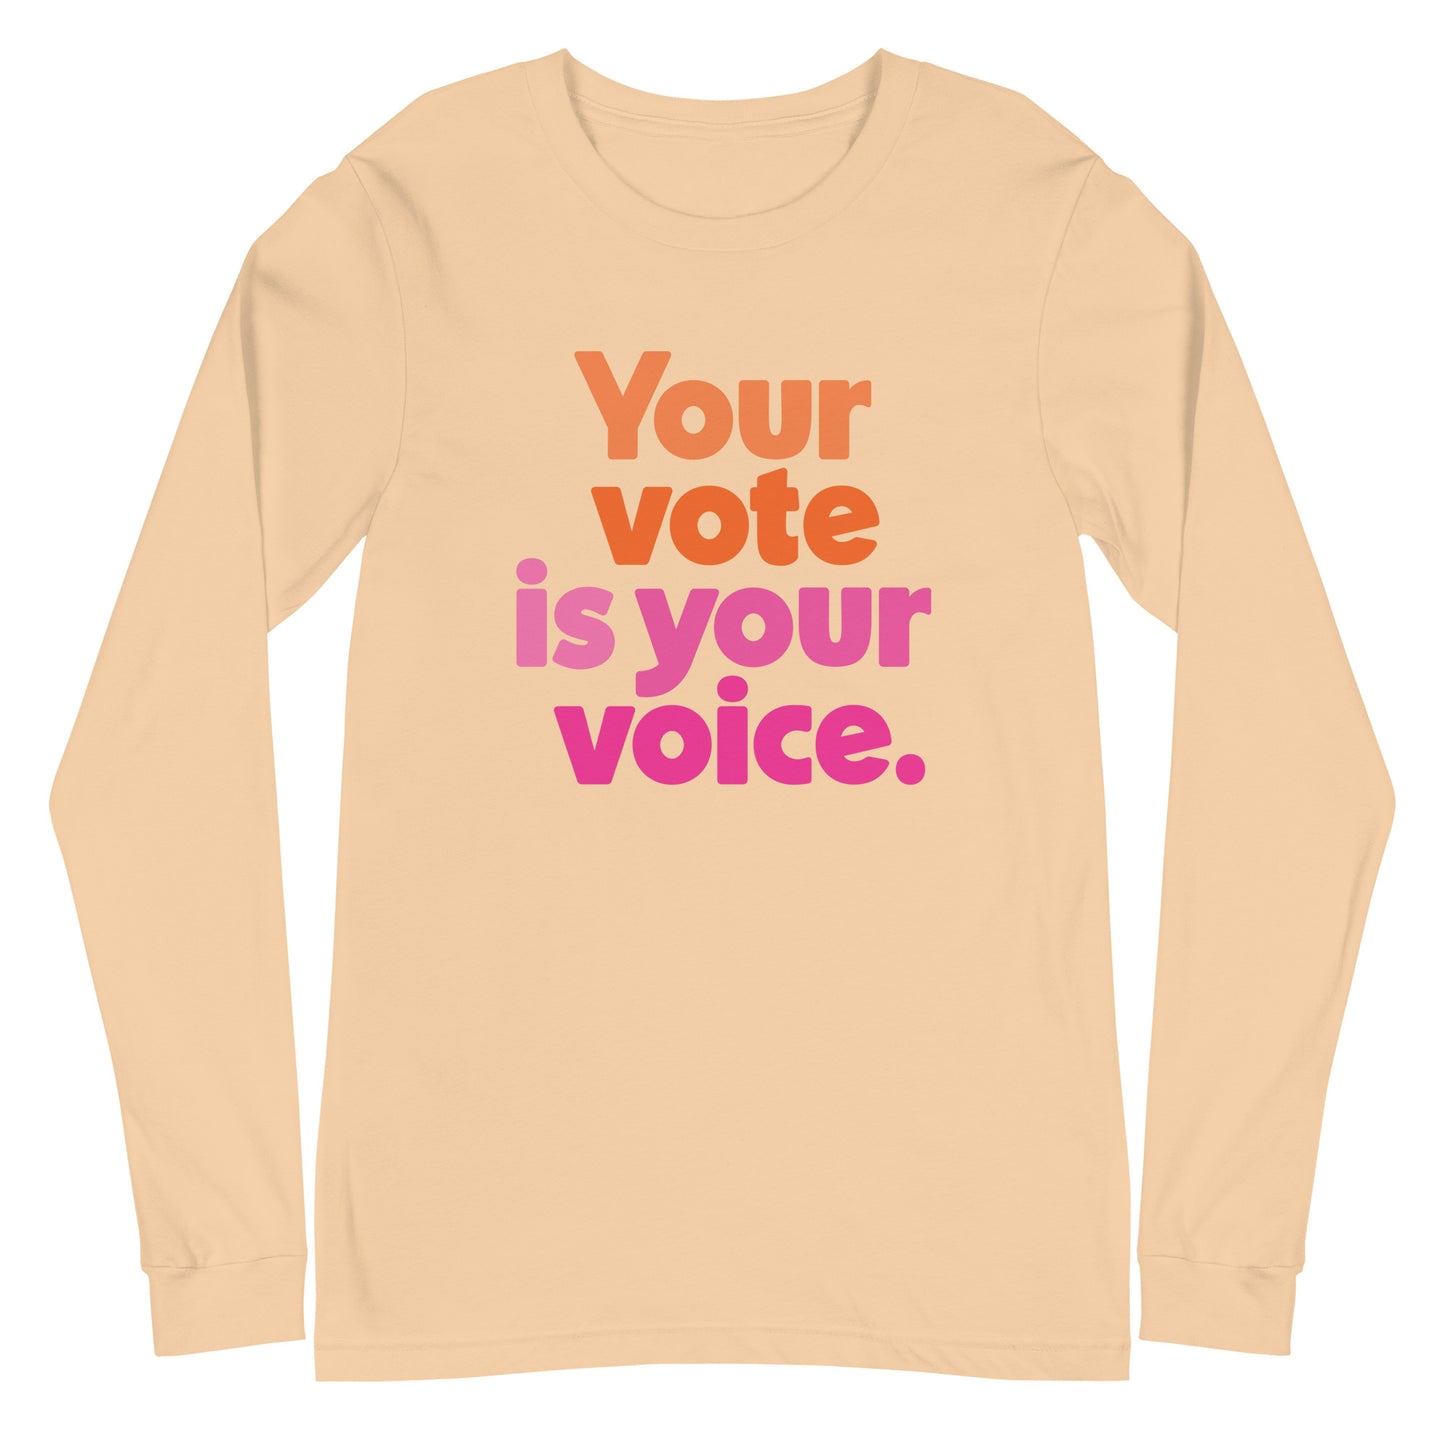 Your vote is your voice - Unisex Long Sleeve Tee